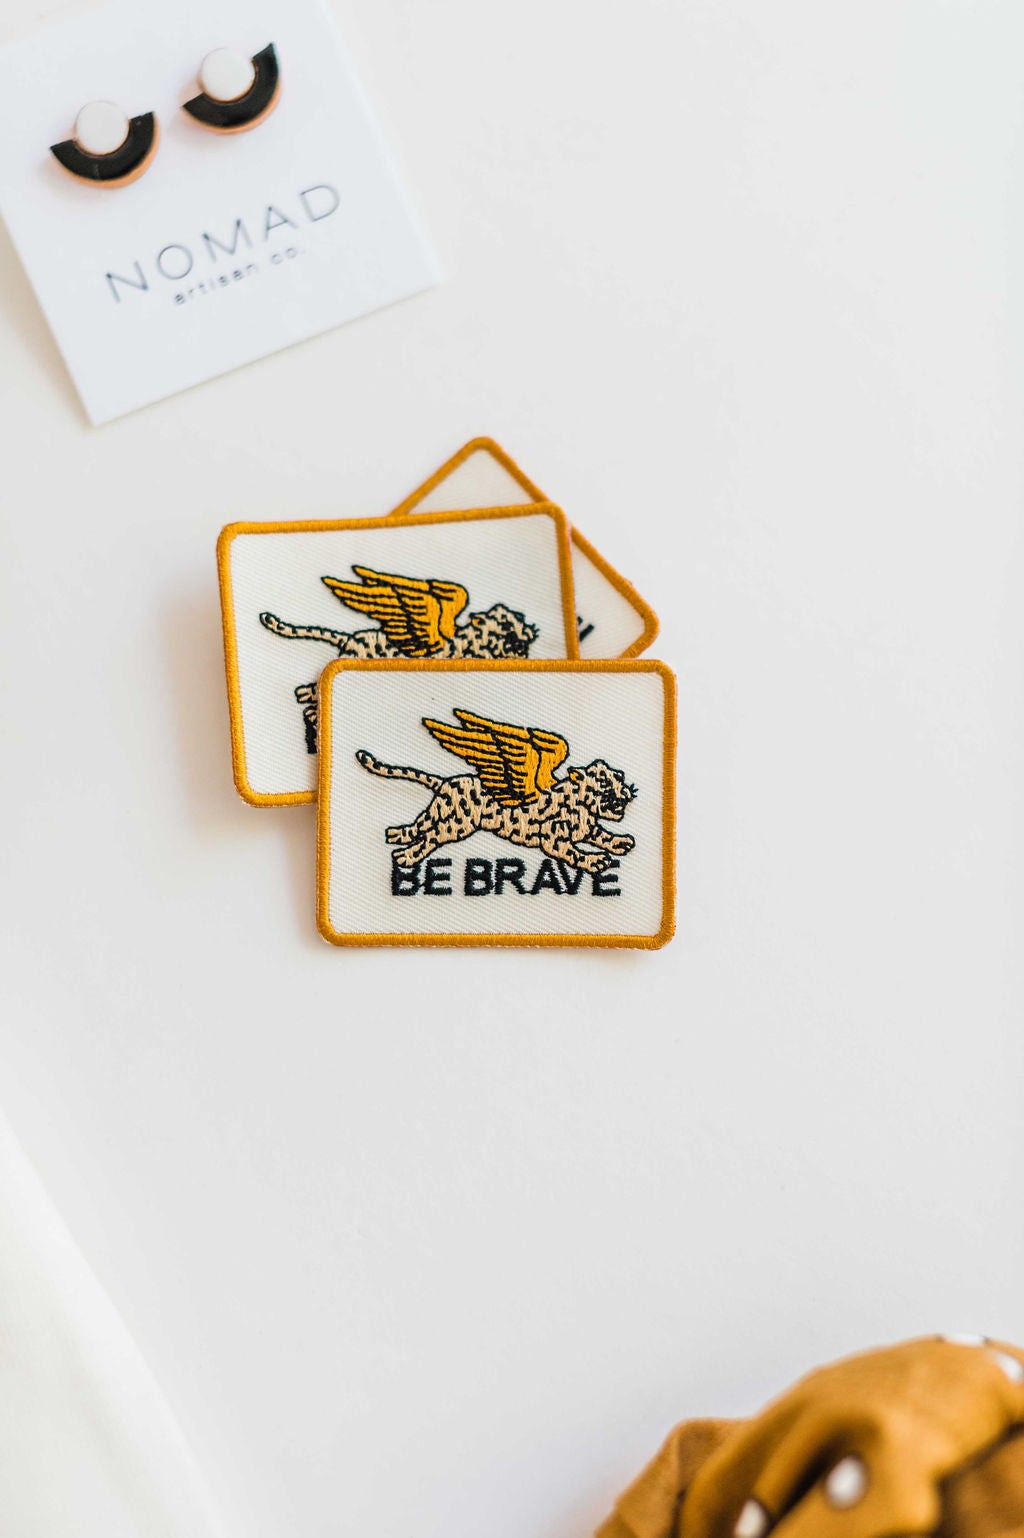 So many possibilities + ways to use these one-of-a-kind Ramble & Co. patches. the design: be brave the color: cream and black background  aprox. 2" x 2.5" To apply: Each patch is woven with an iron on backing.   Ramble & Co. is a family owned business. Shop at shop.rambleandcompany.com or visit our store in Wichita Falls, Texas || small batch/ hand printed tees + fine art prints | your source of encouragement + inspiration.